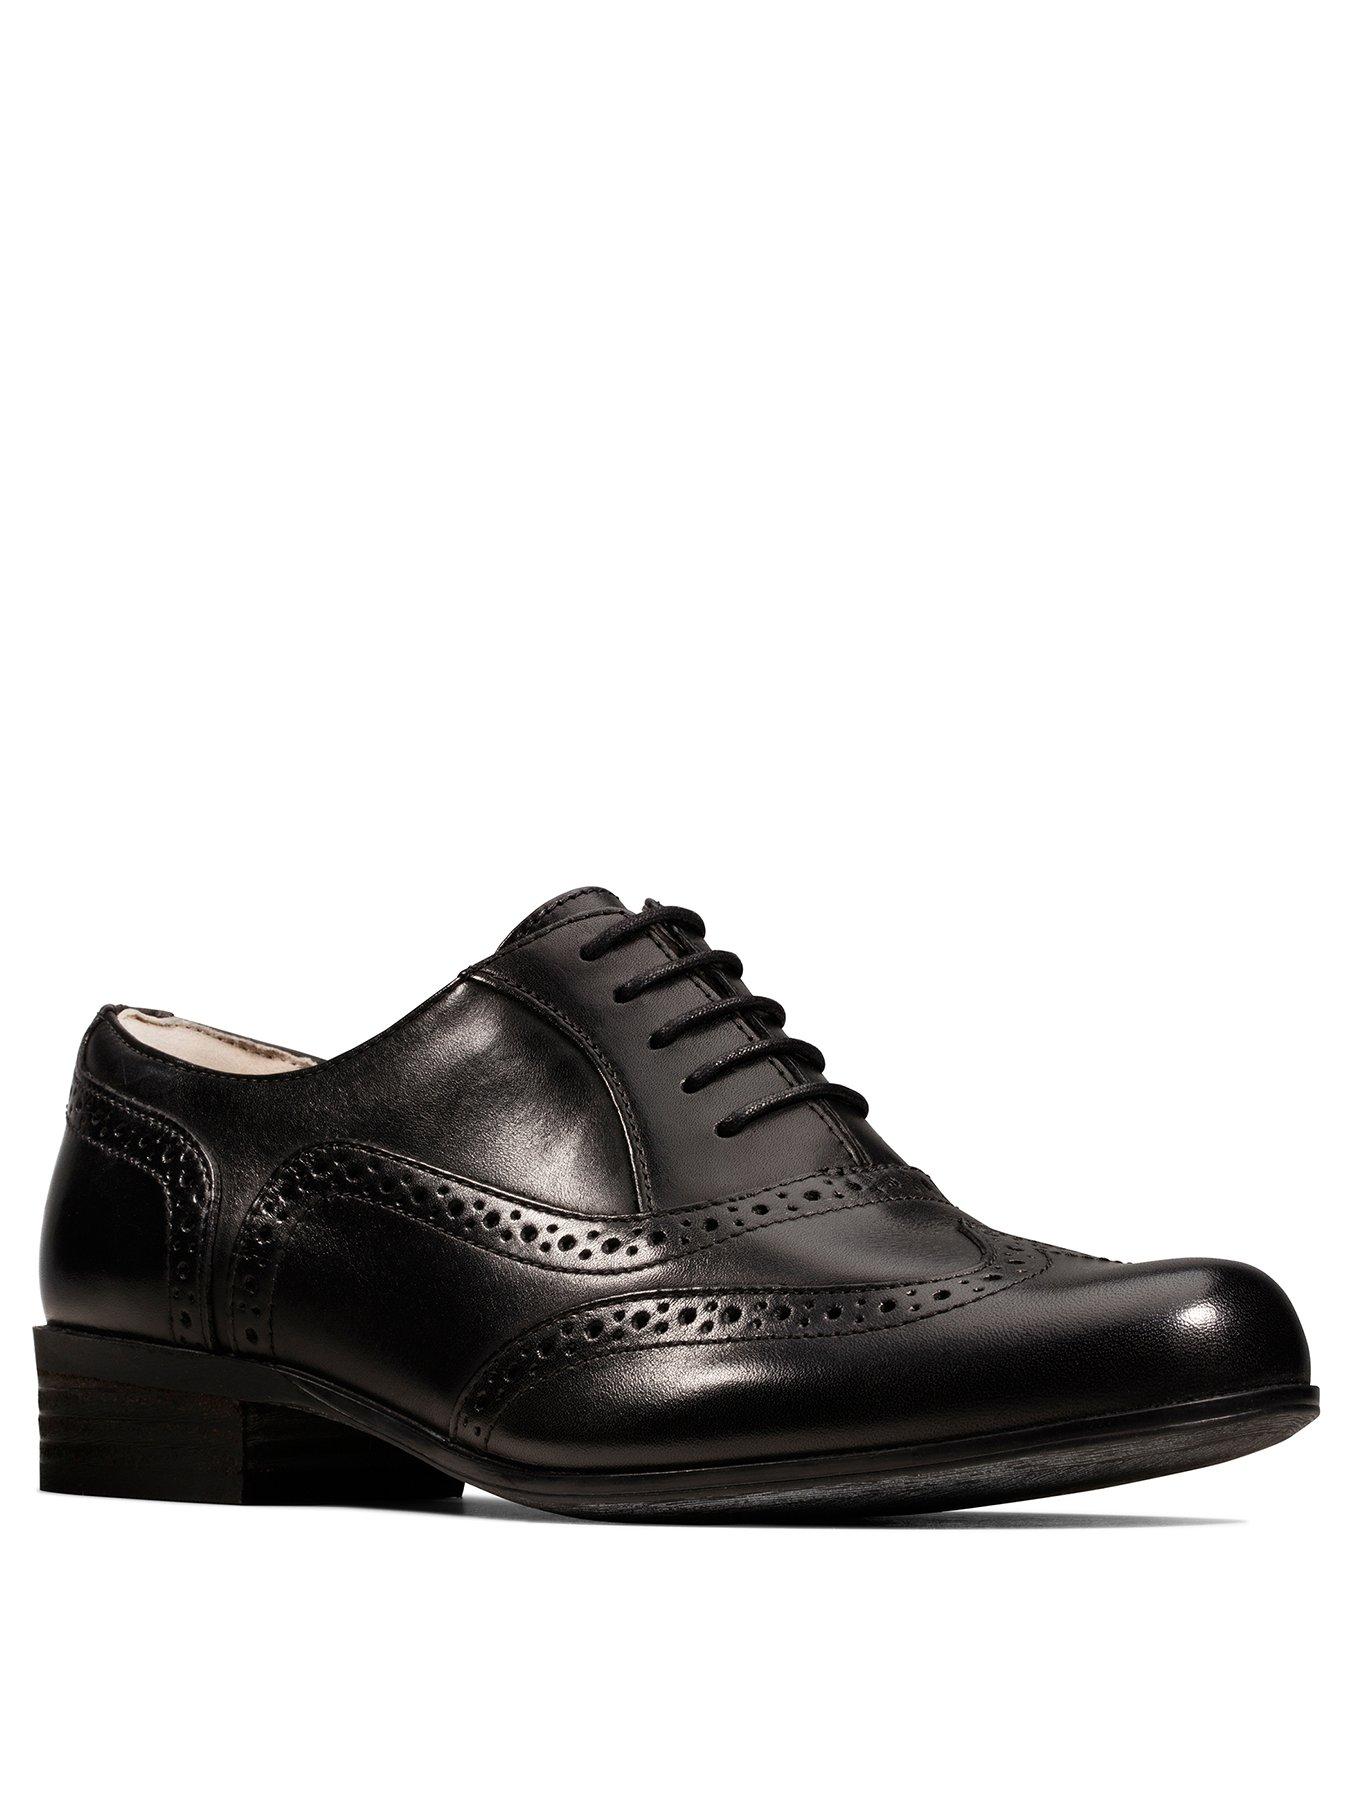 clarks wide fit brogues